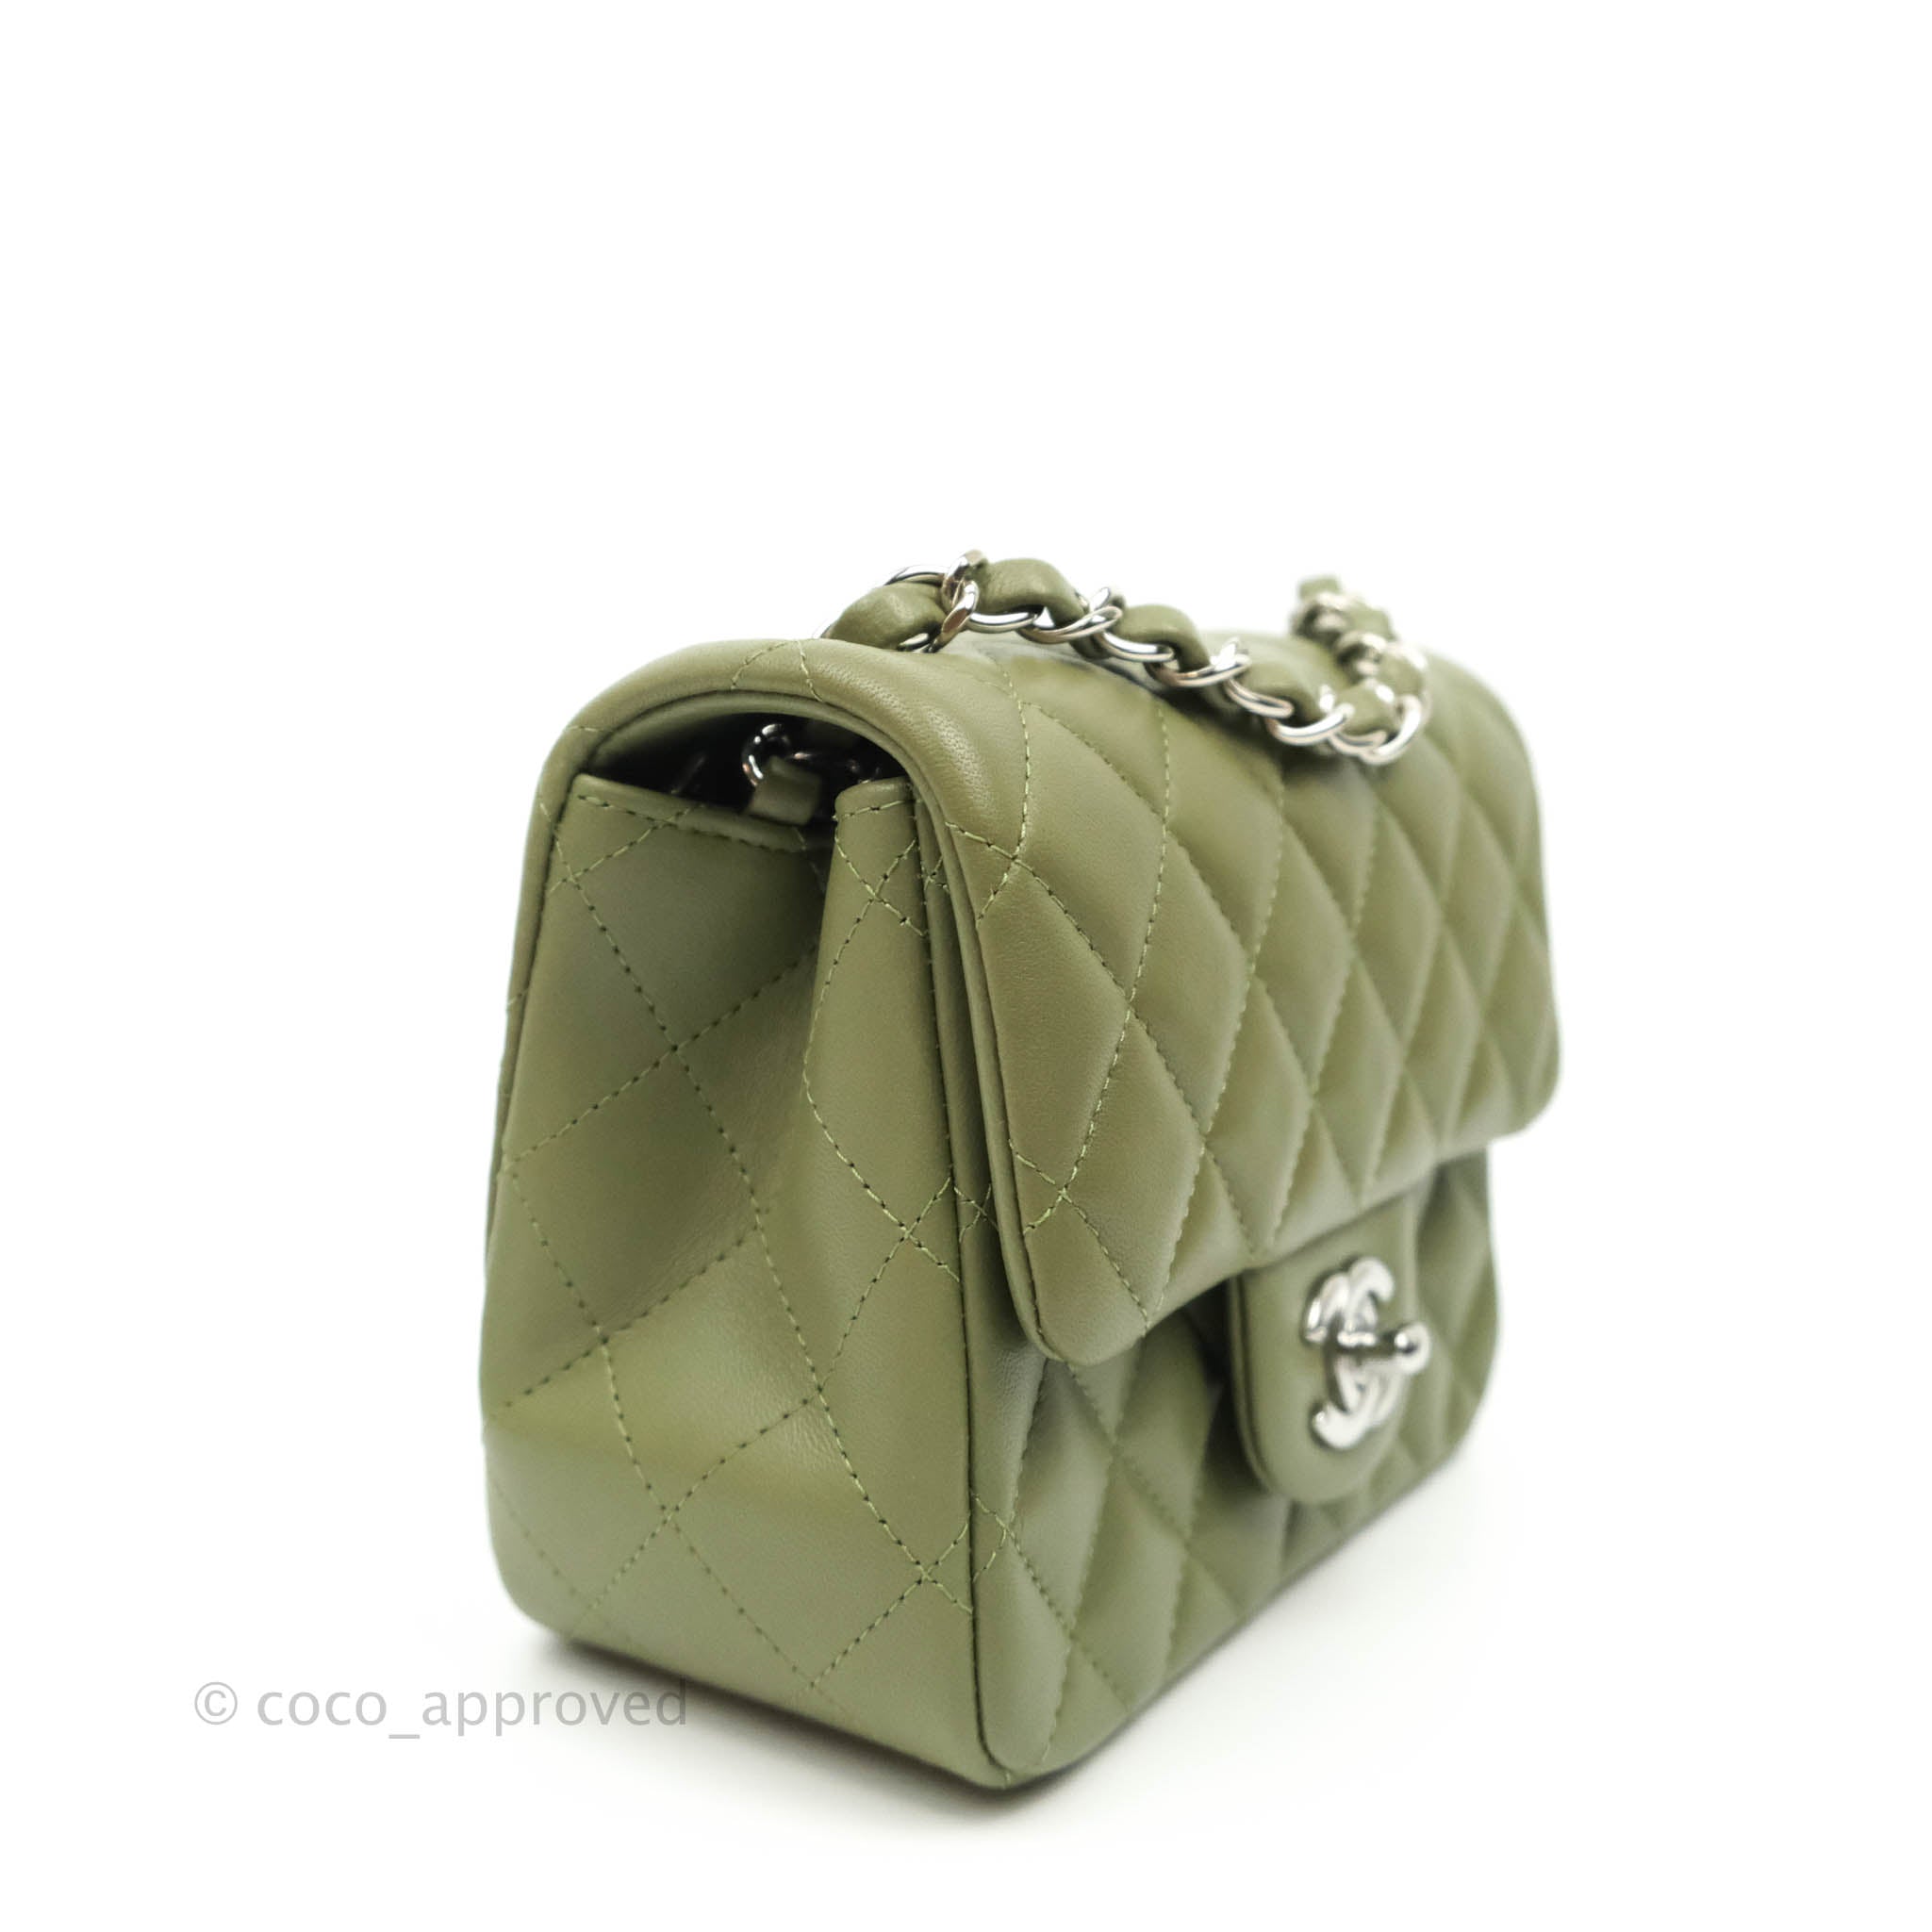 CHANEL Lambskin Quilted Mini Square Flap Green 753176